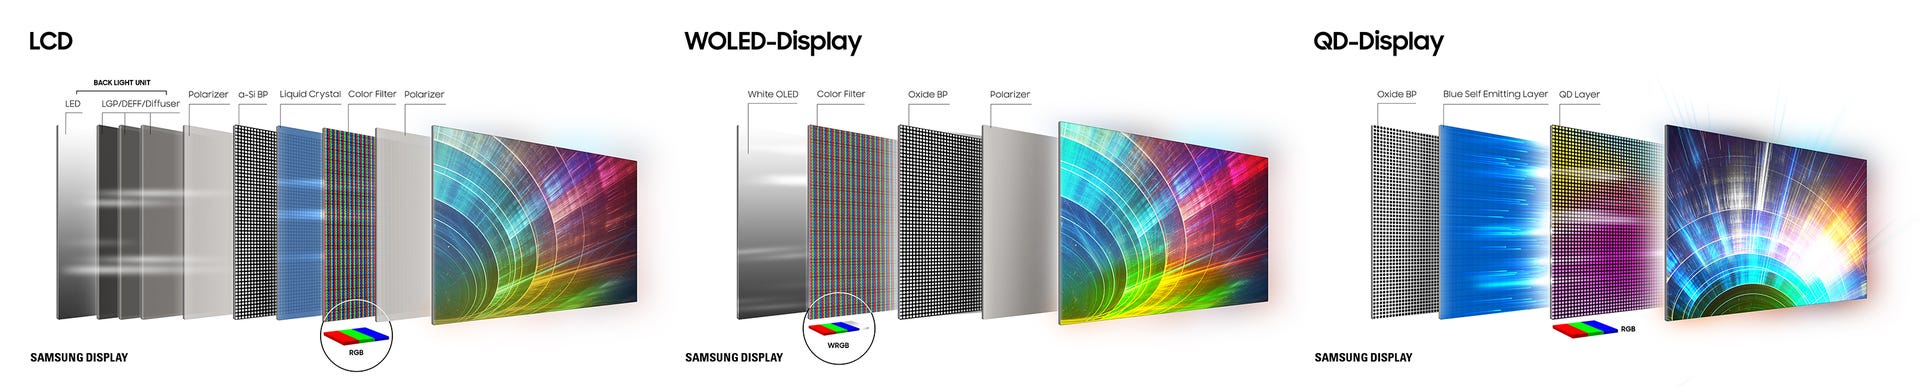 Samsung's visualization comparing the layers of a TV image as made by LCD, OLED and QD-OLED TVs.